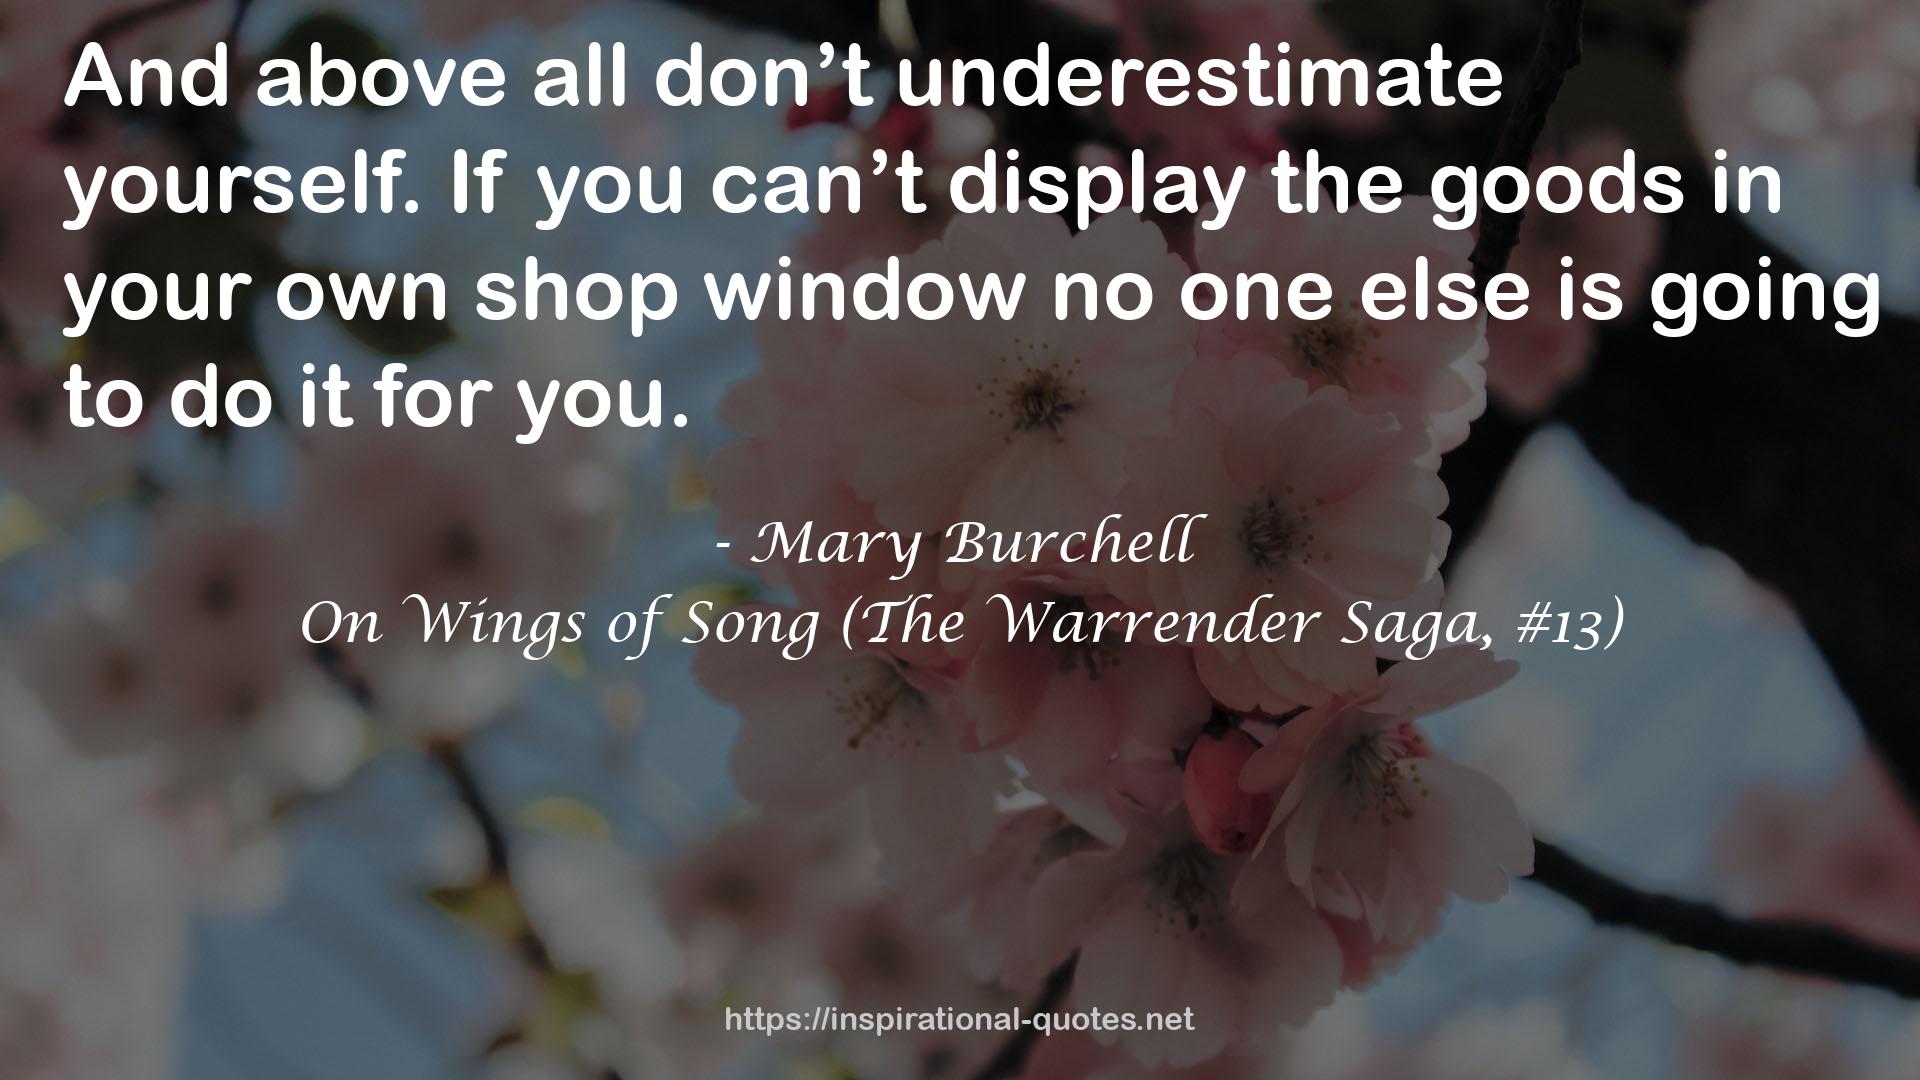 On Wings of Song (The Warrender Saga, #13) QUOTES